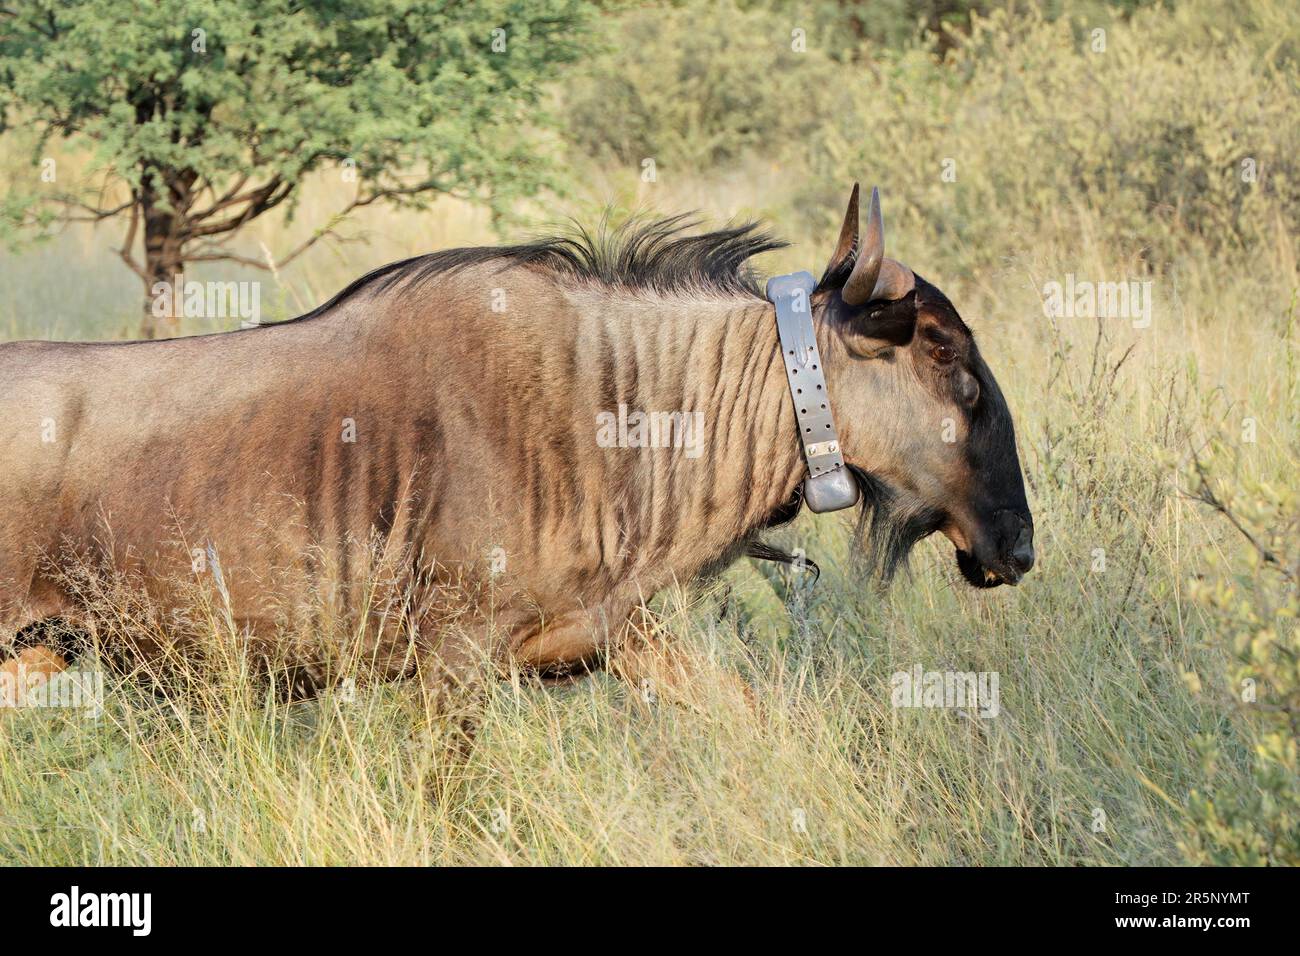 A blue wildebeest (Connochaetes taurinus) fitted with a satellite tracking collar used for scientific research, South Africa Stock Photo